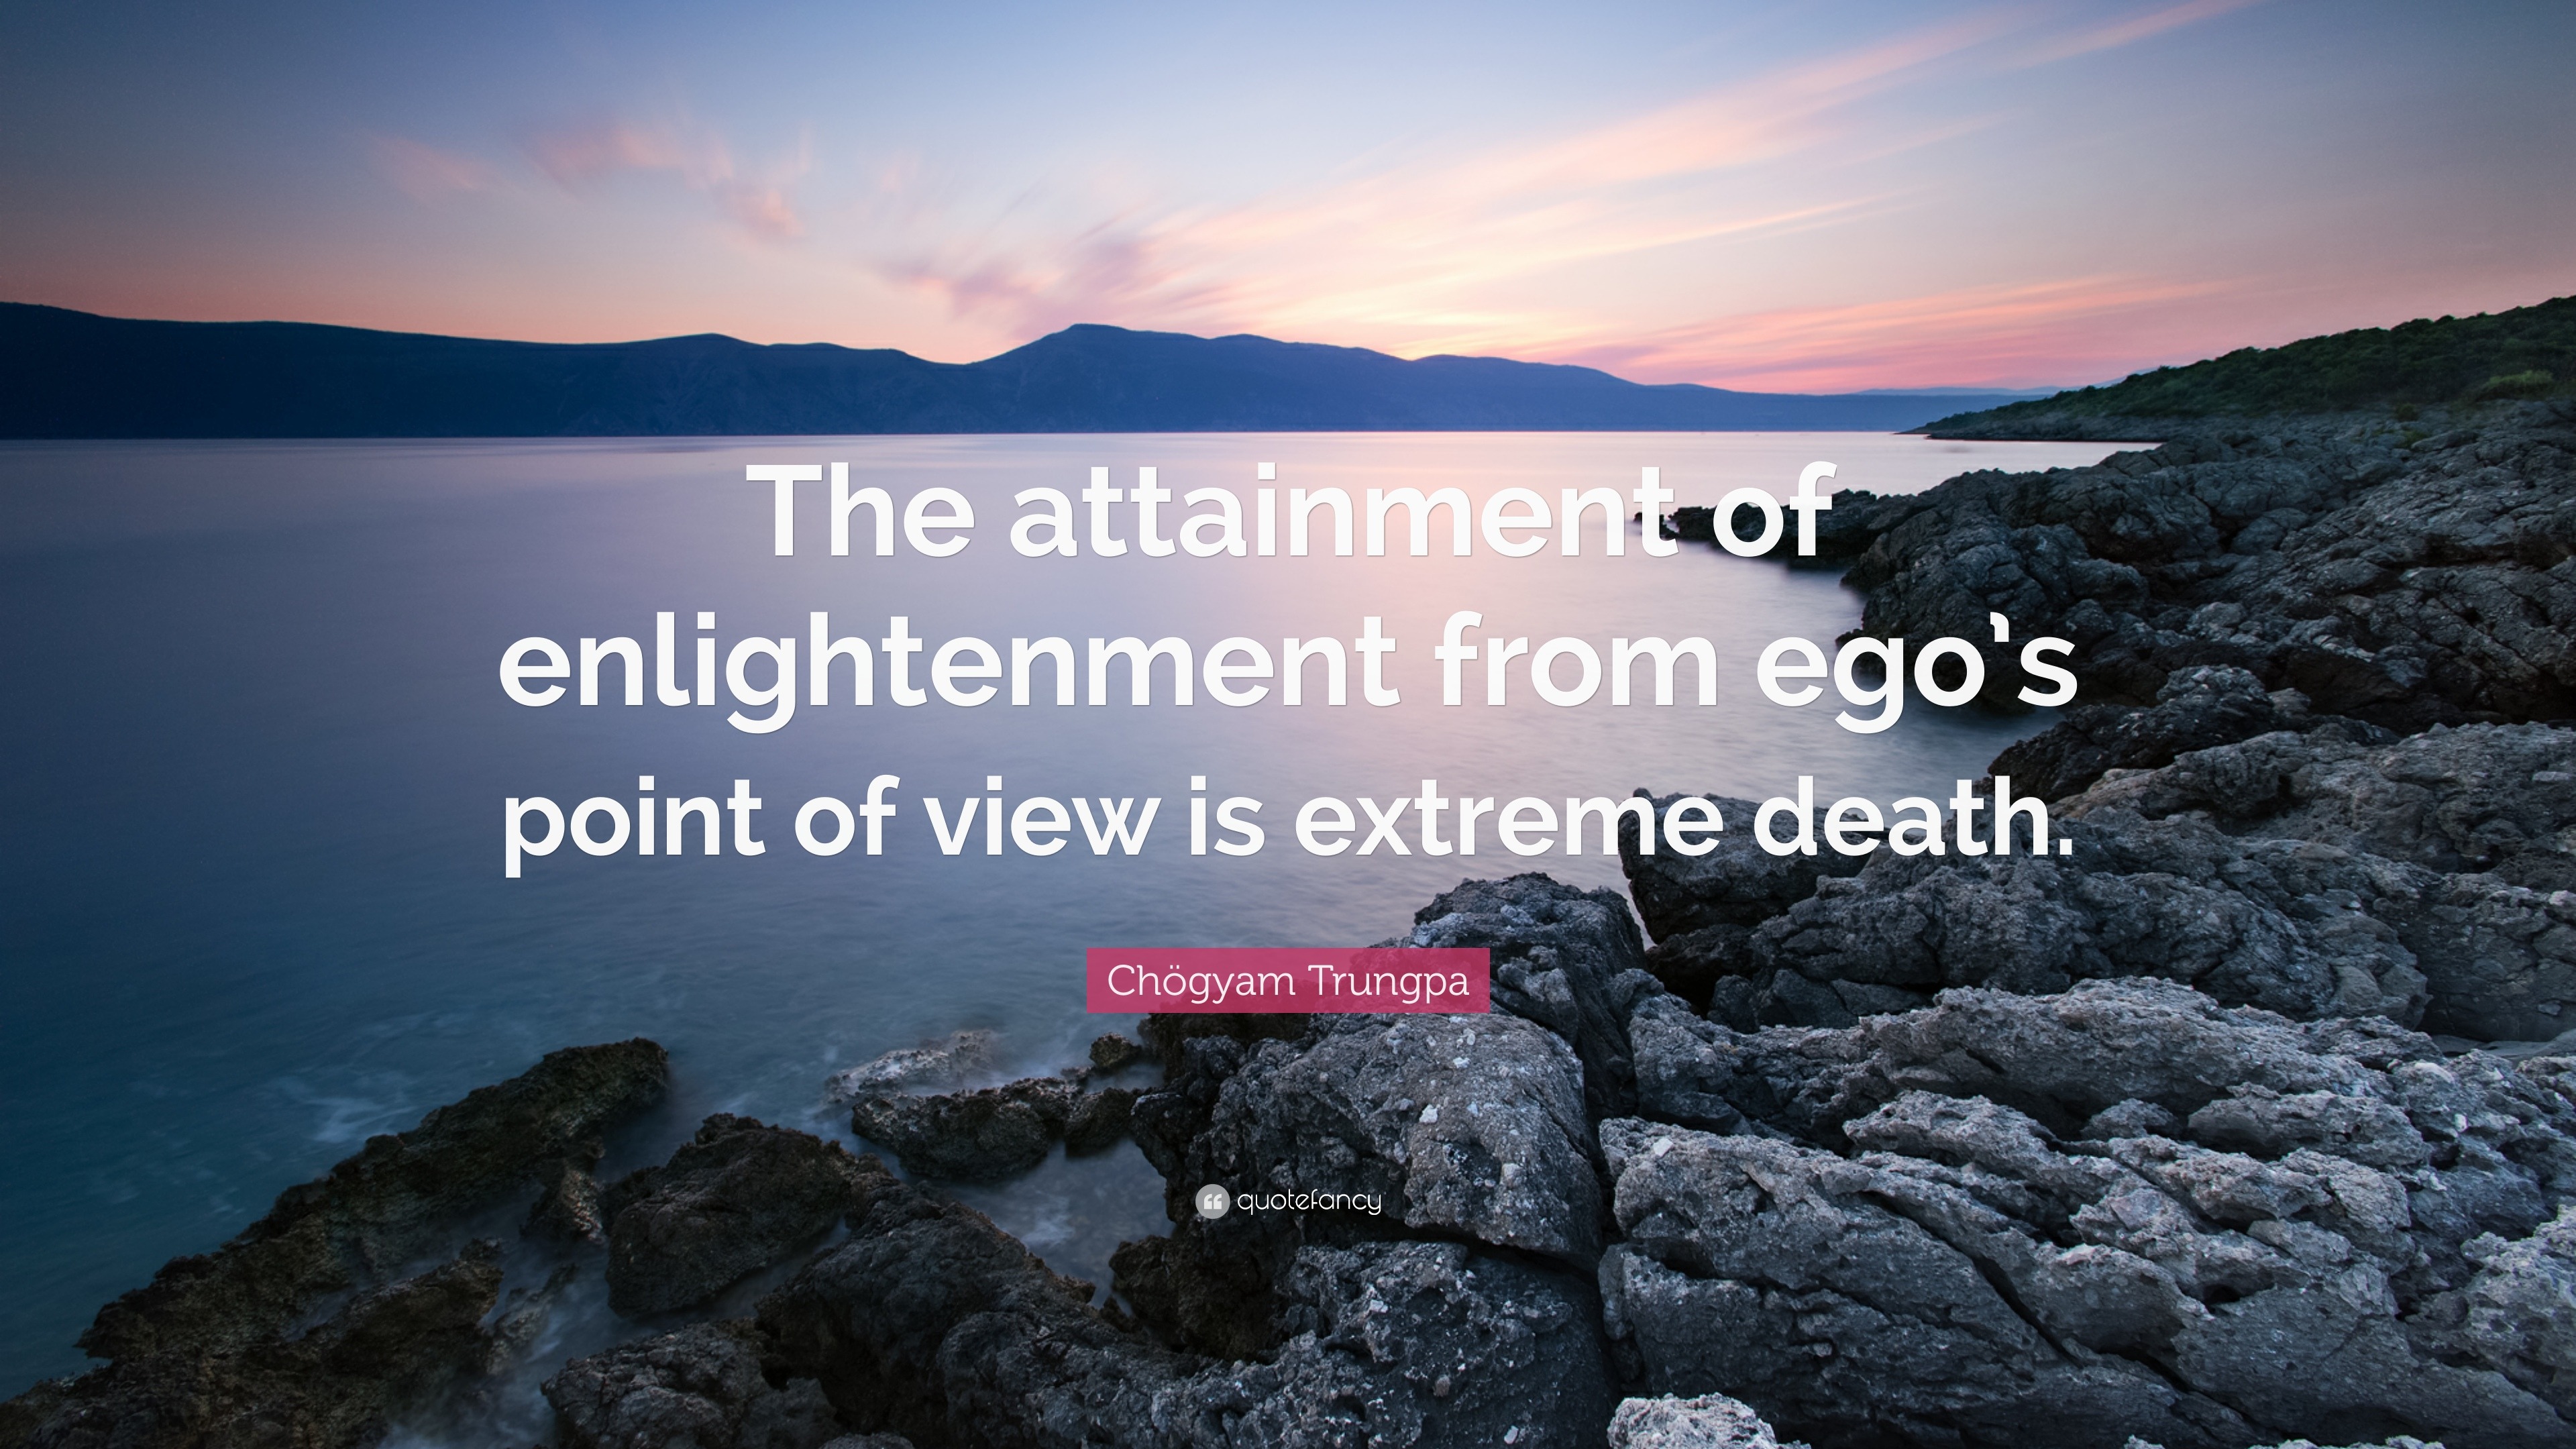 Chögyam Trungpa Quote: “The attainment of enlightenment from ego's point of  view is extreme death.”